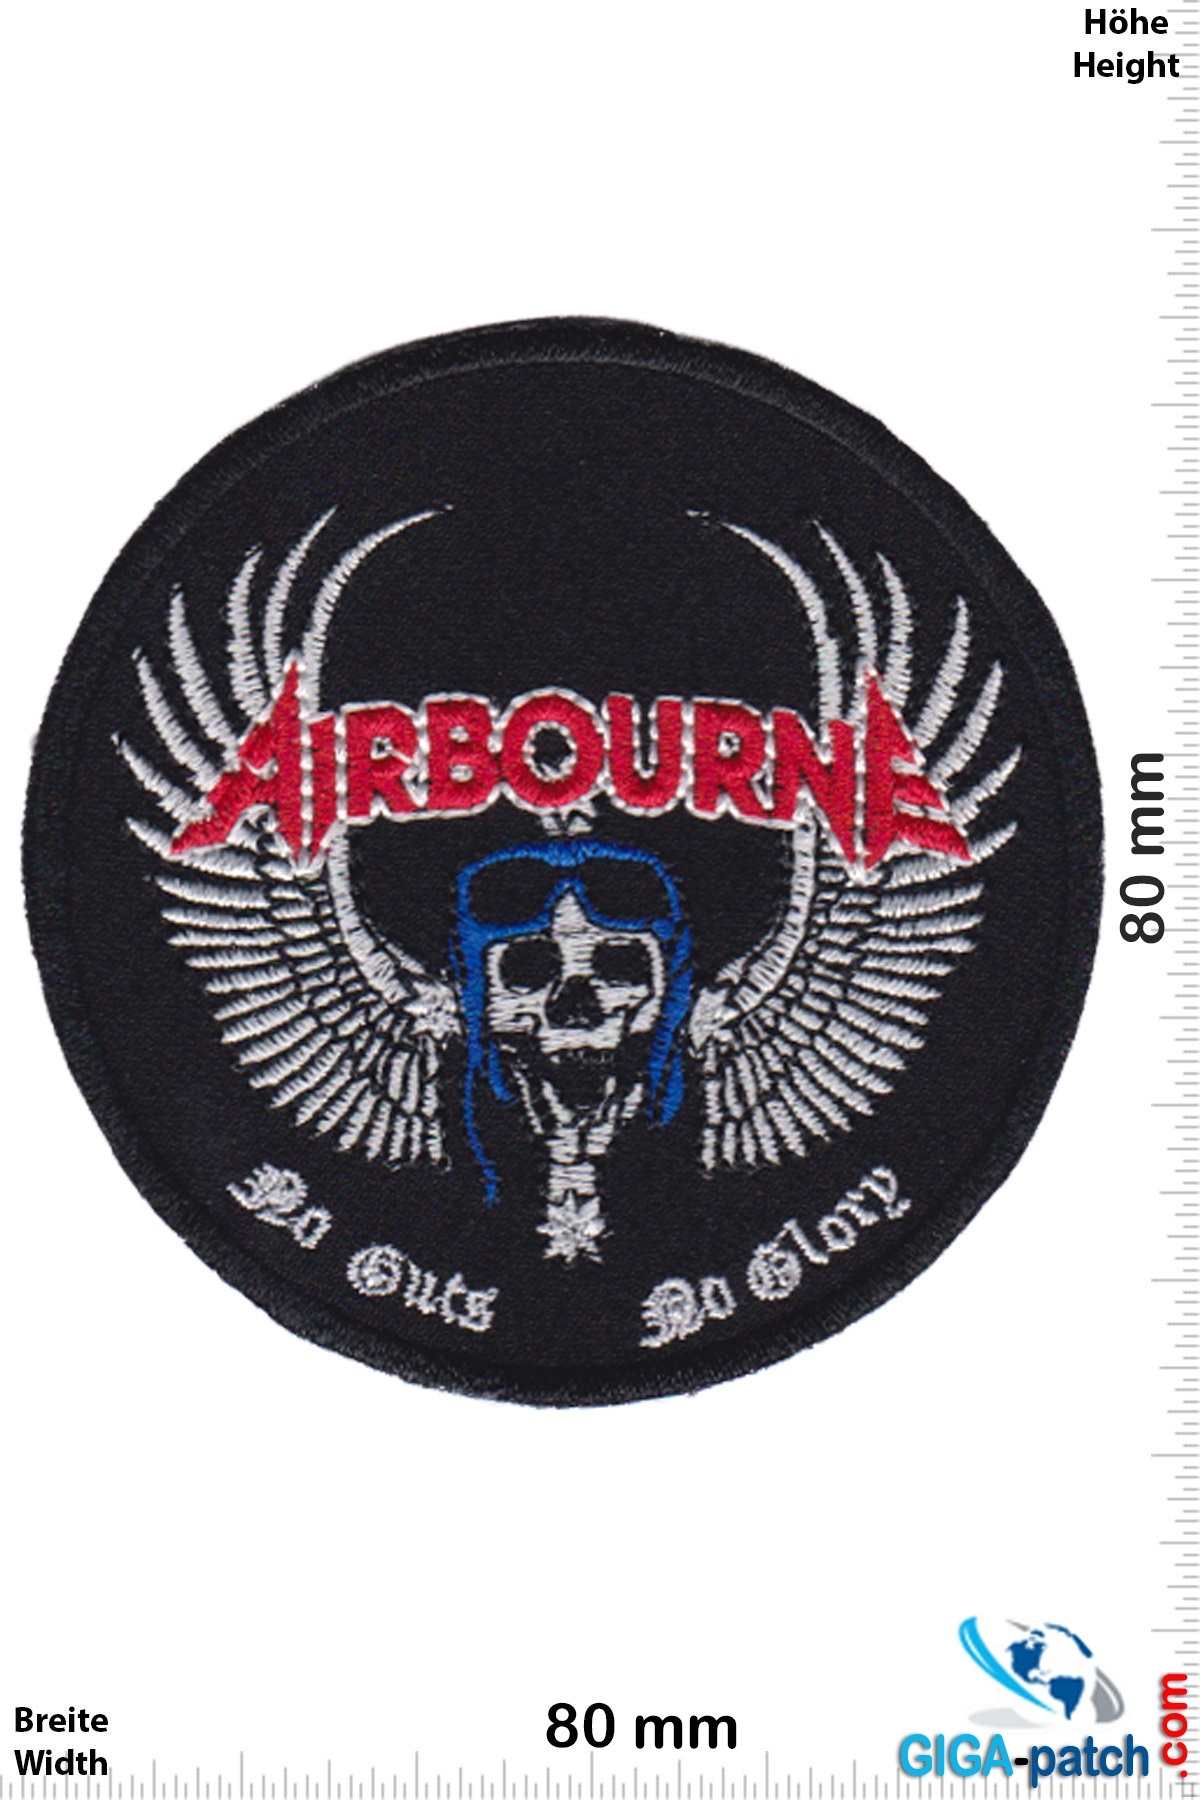 Airbourne Airbourne  - No Guts   No Glory